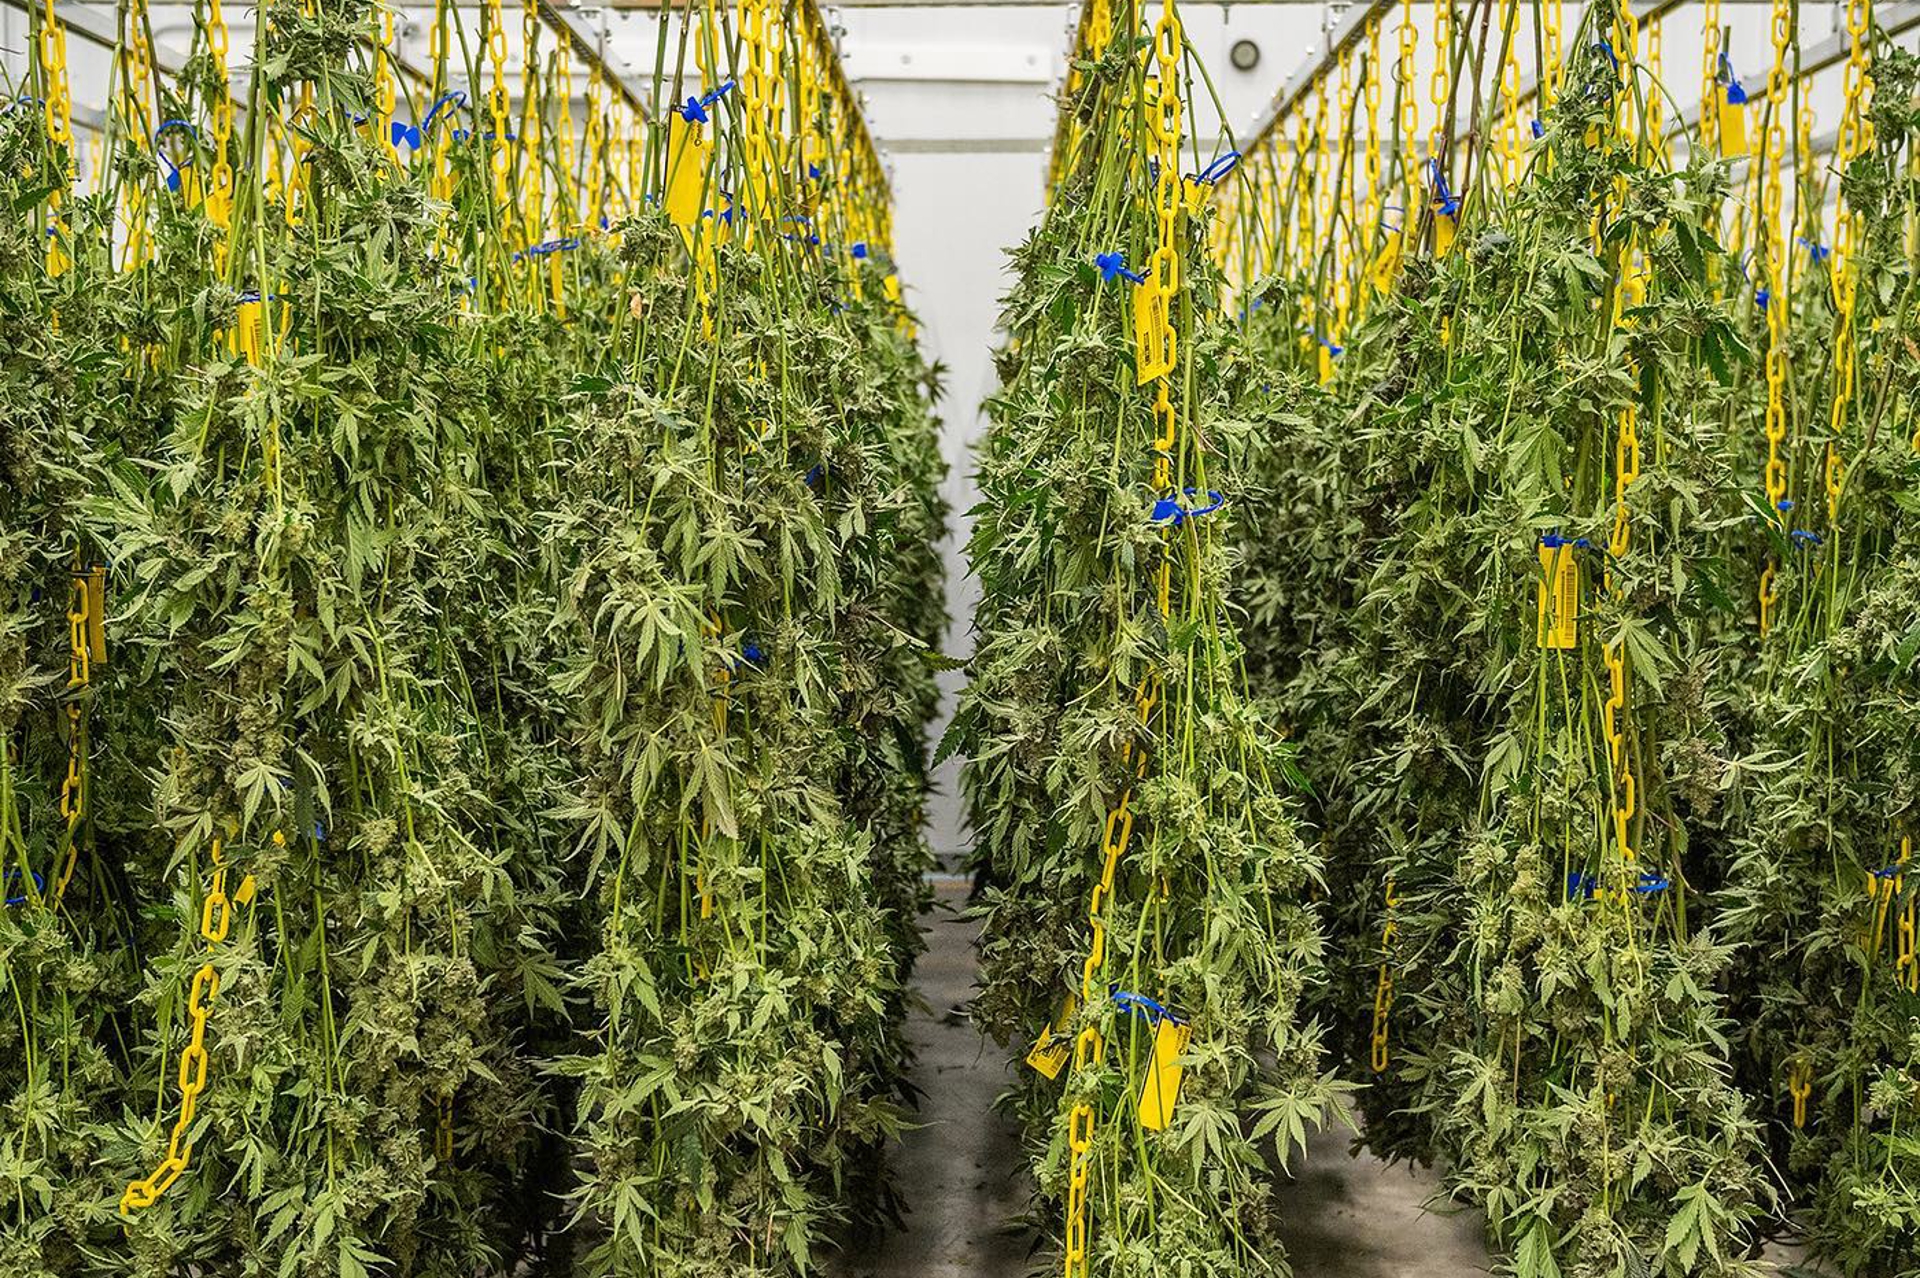 Drying room for cannabis harvest in greenhouse facility